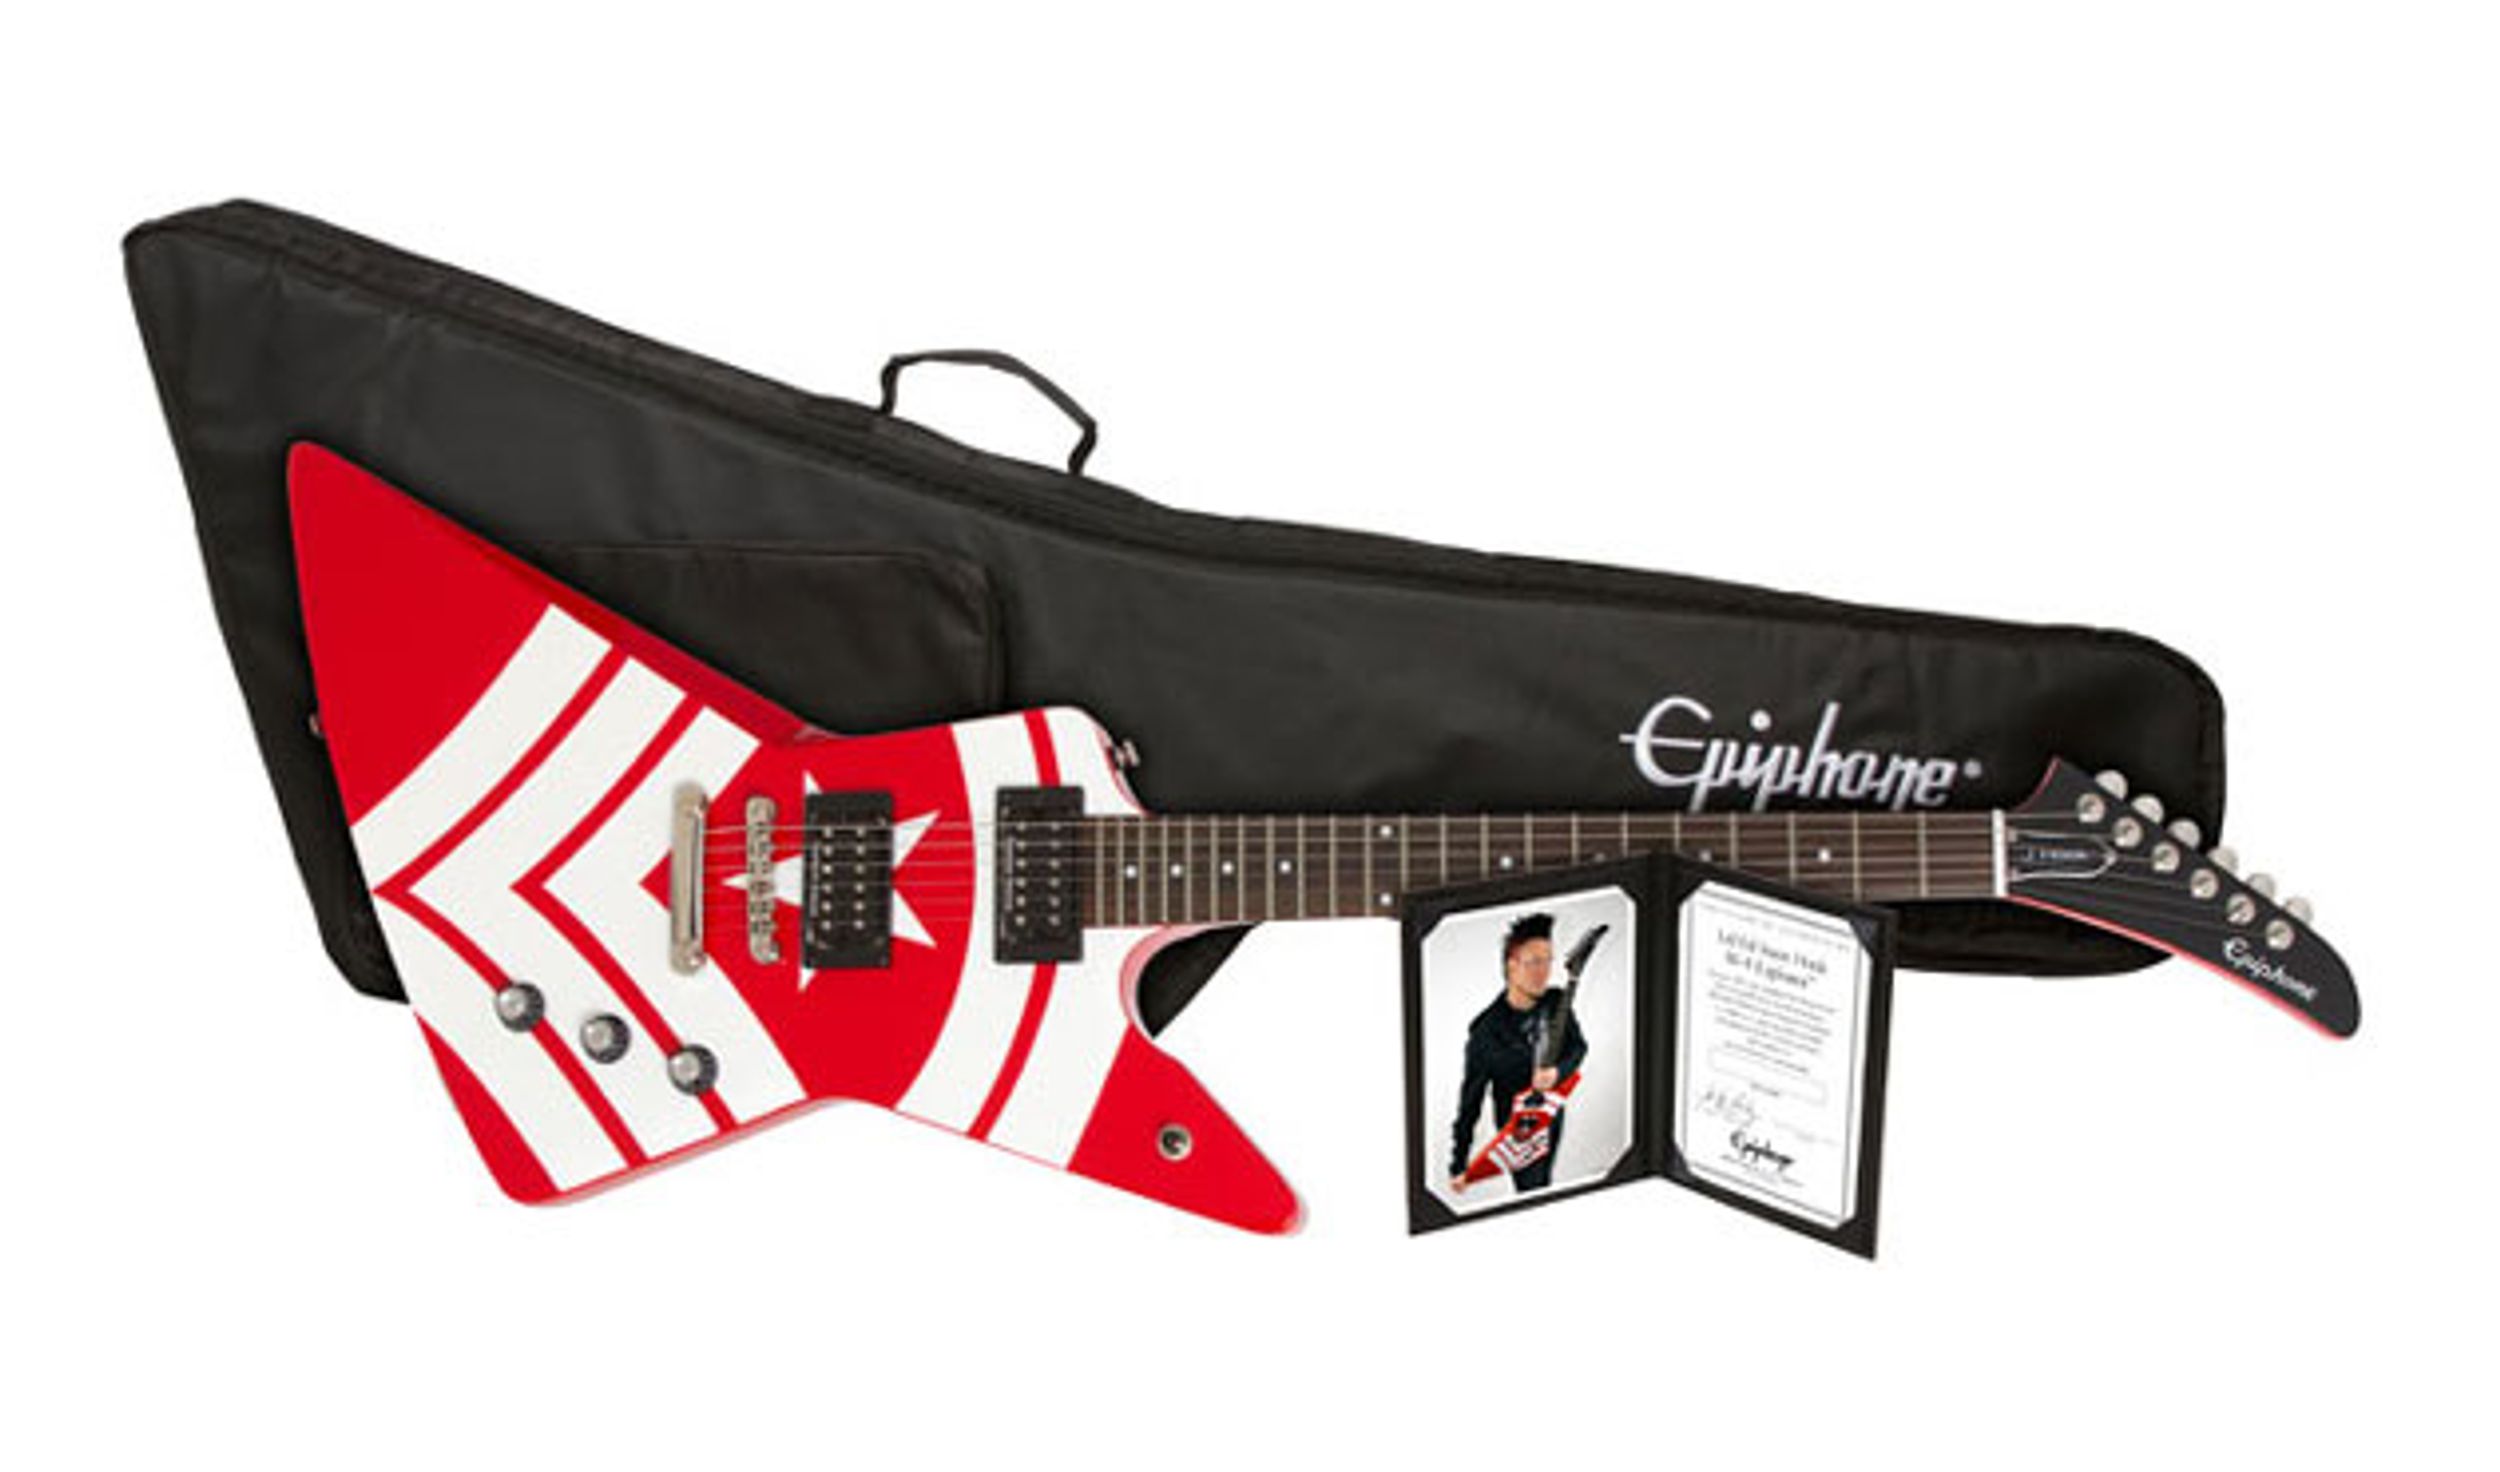 Epiphone Introduces the Limited-Edition Jason Hook M-4 Explorer Outfit